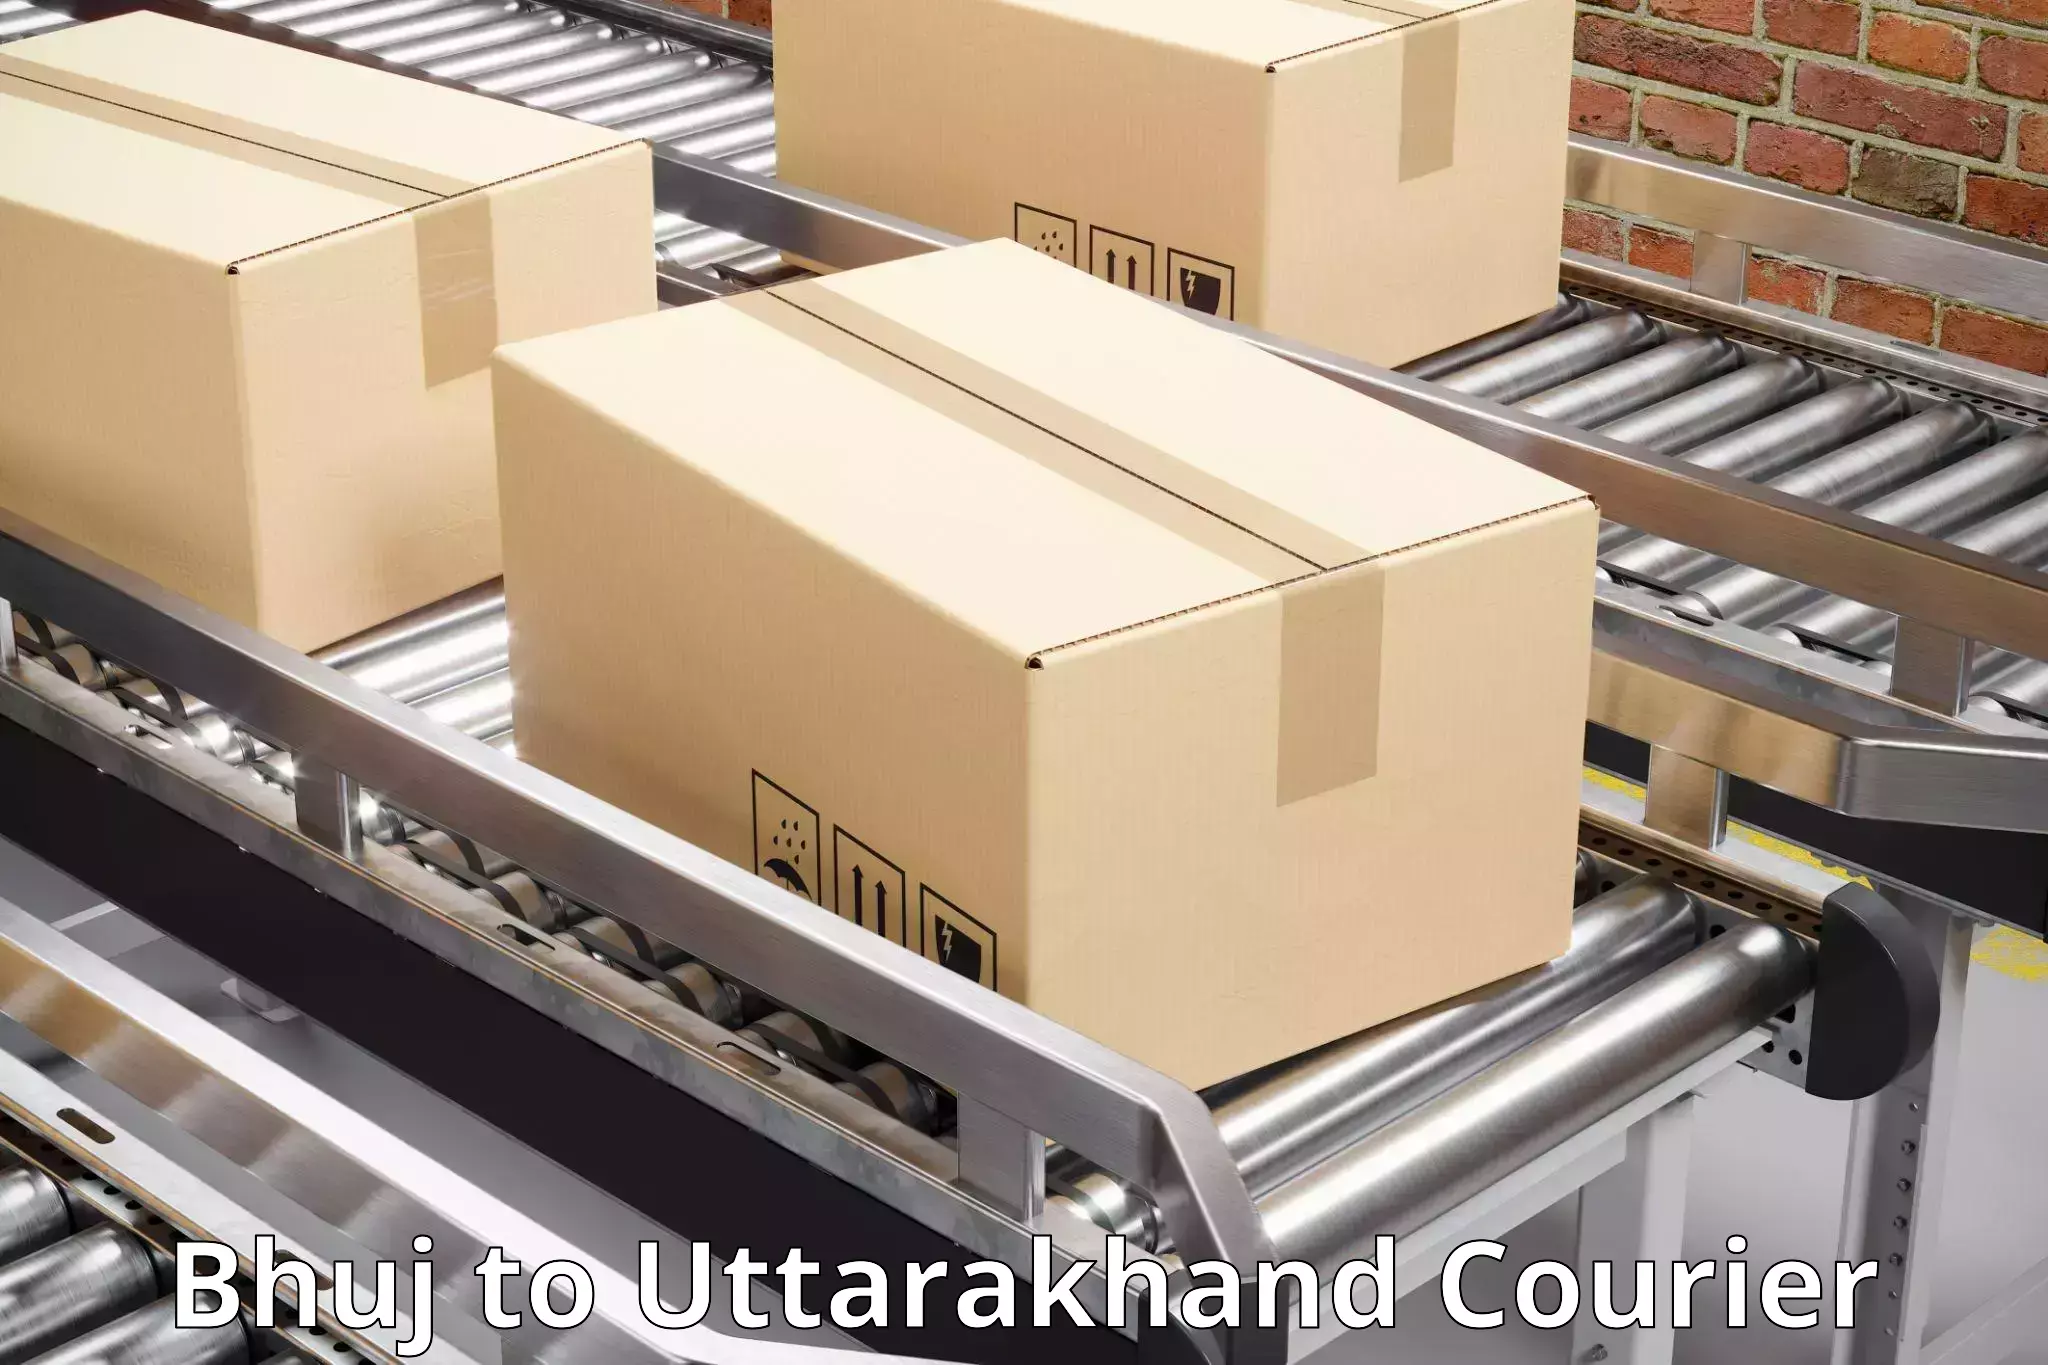 Round-the-clock parcel delivery Bhuj to Gairsain